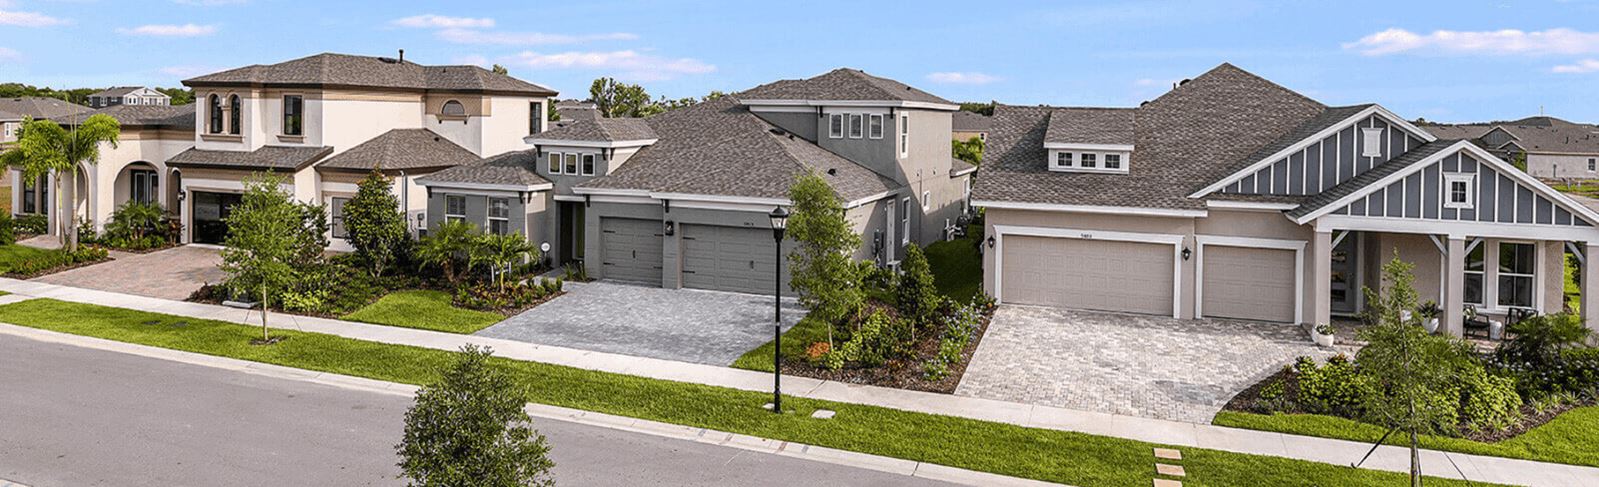 Streetscape of new homes in Waterset, new homes in Apollo Beach.